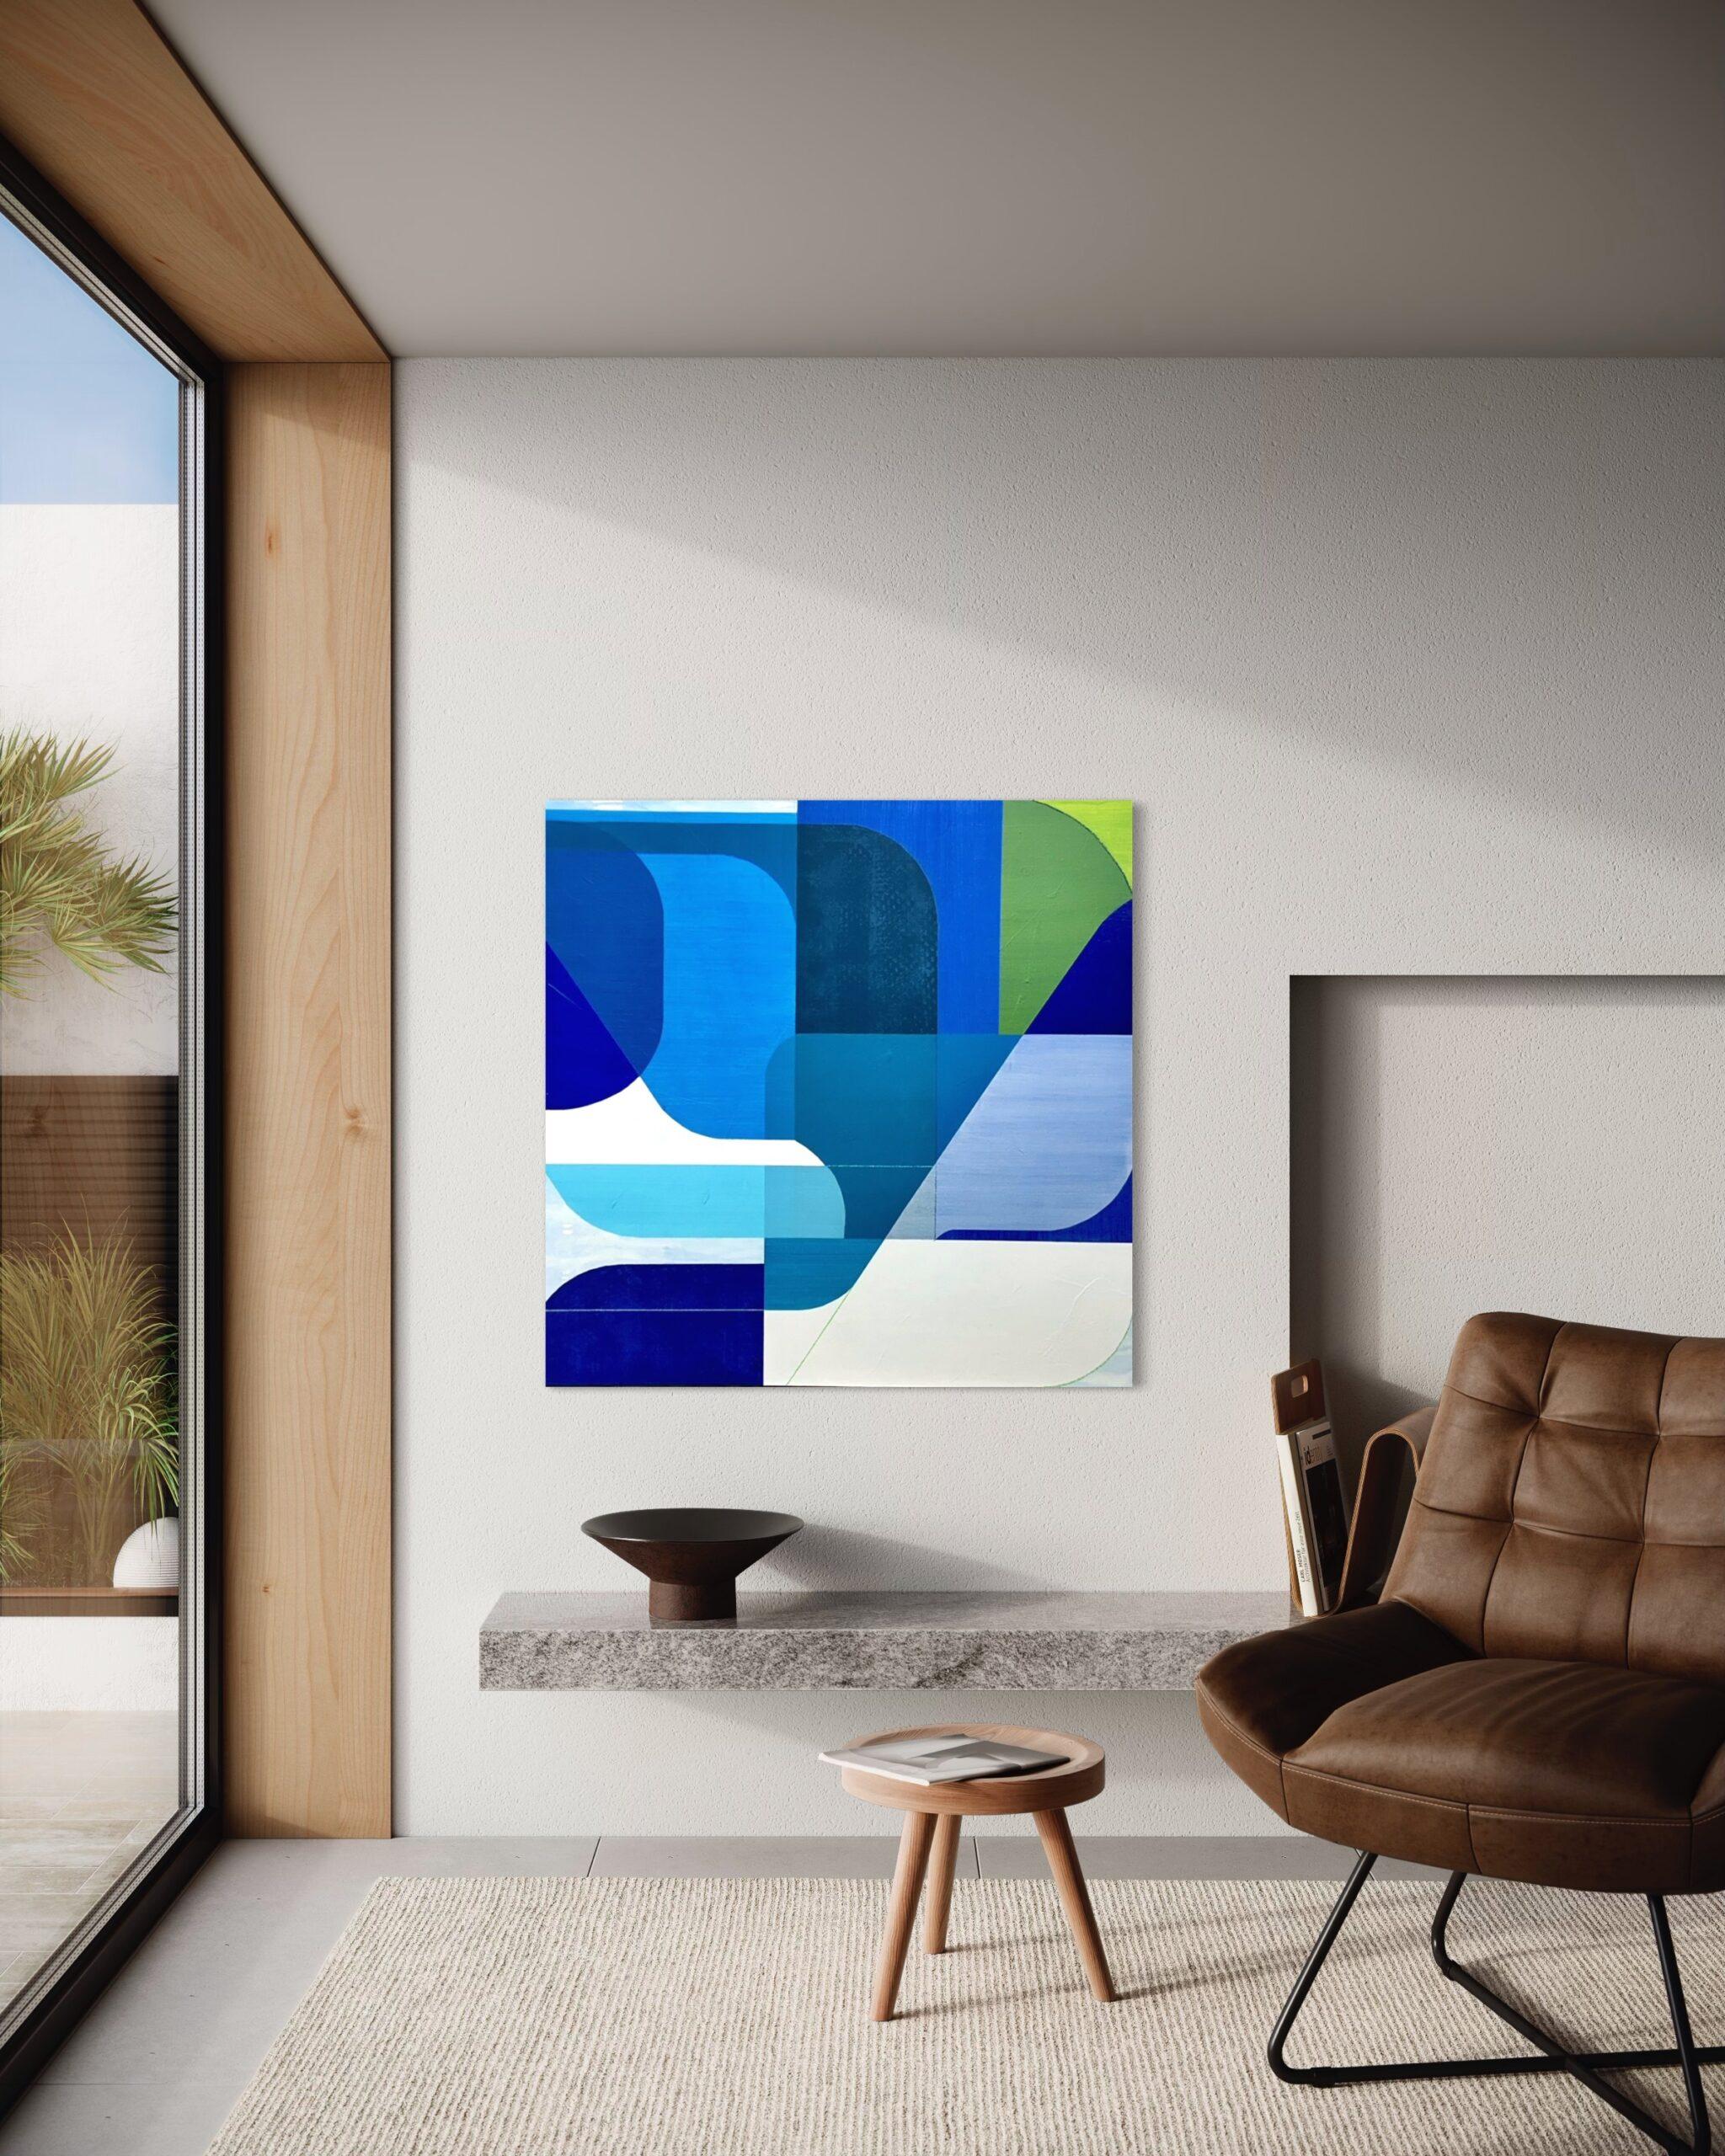 Here, Strickfaden skillfully employs a palette featuring nuanced shades of blues, greens, and whites, conjuring imagery reminiscent of cool blue pools under the warmth of Southern California’s sun. Executed with a discerning blend of design and